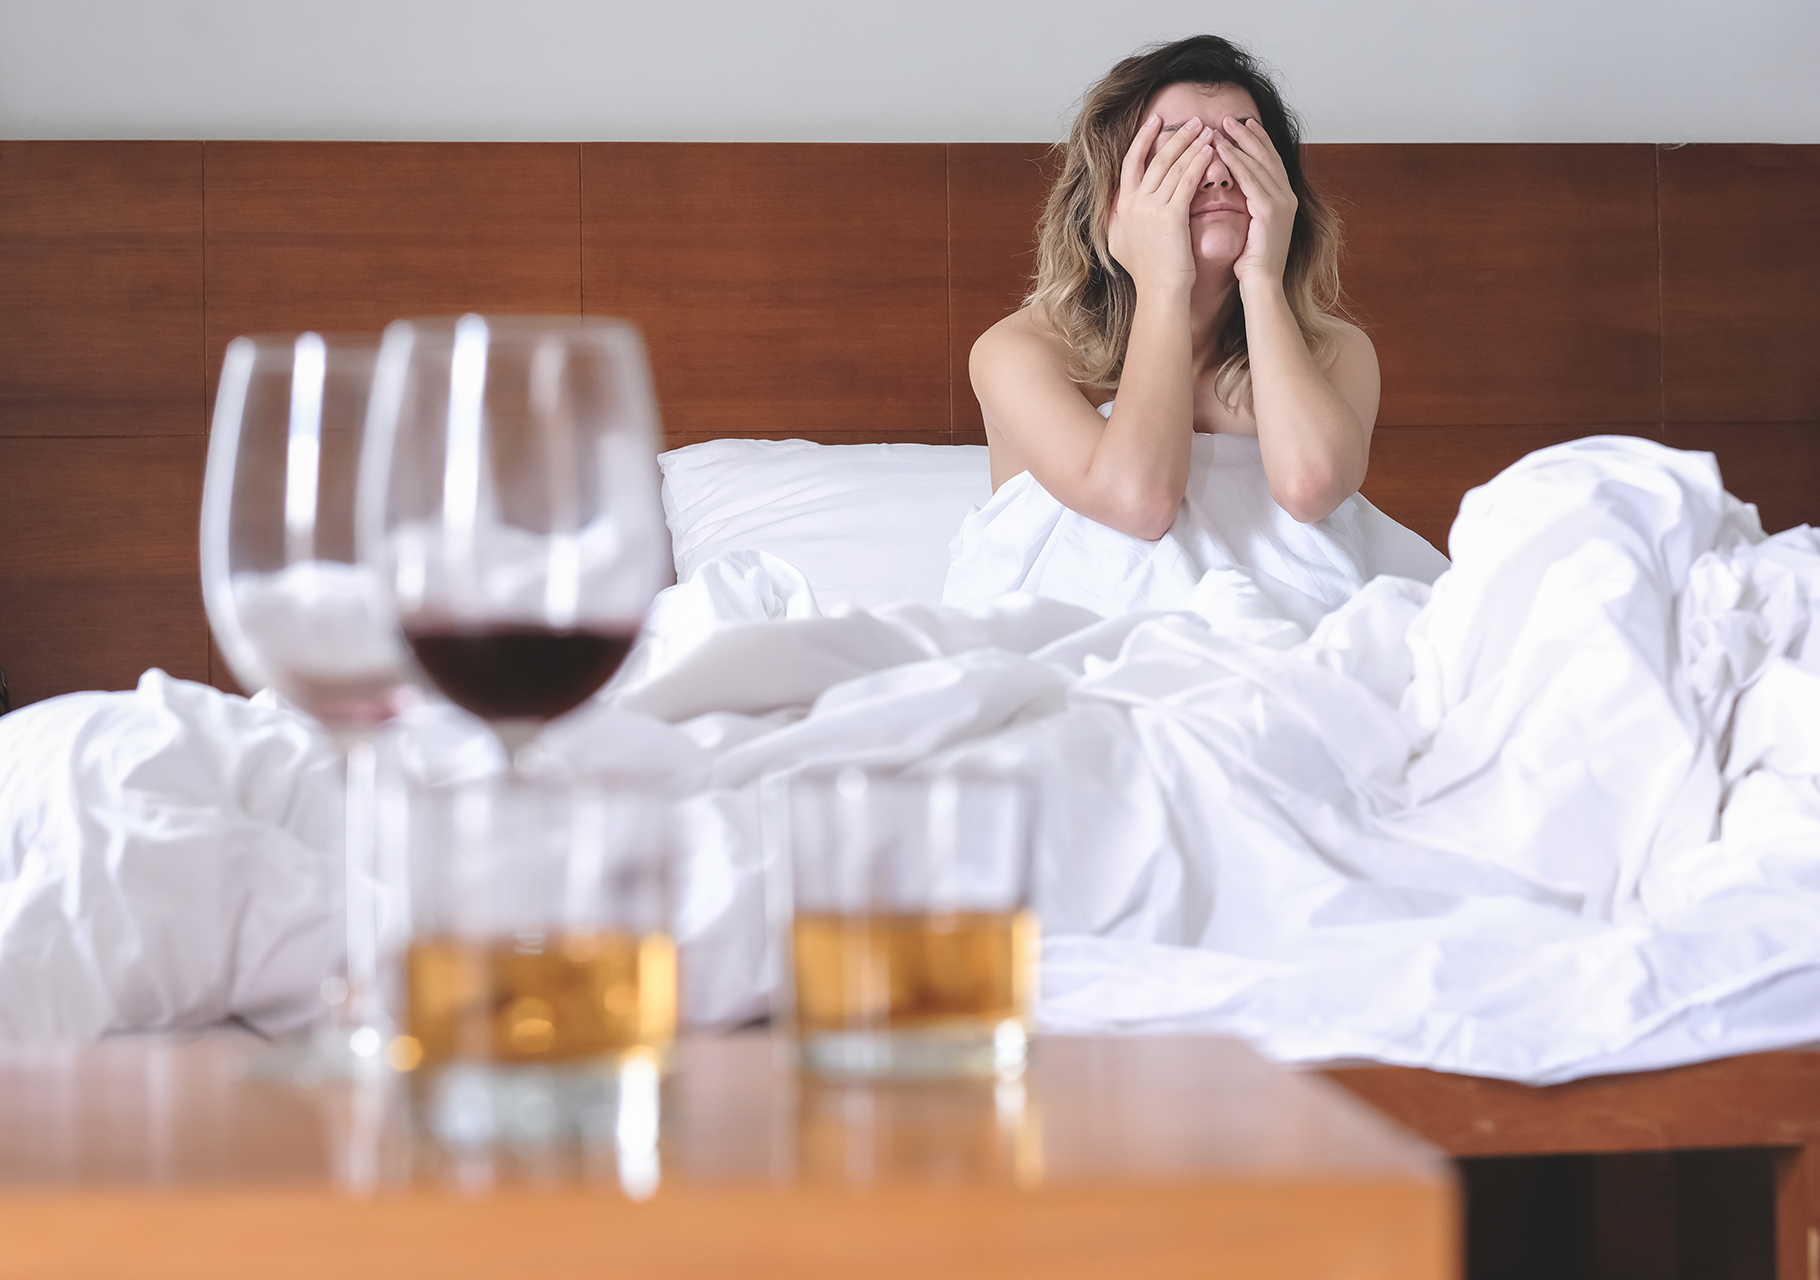 Exhausted woman in bed with wine and tumblers on a nearby table